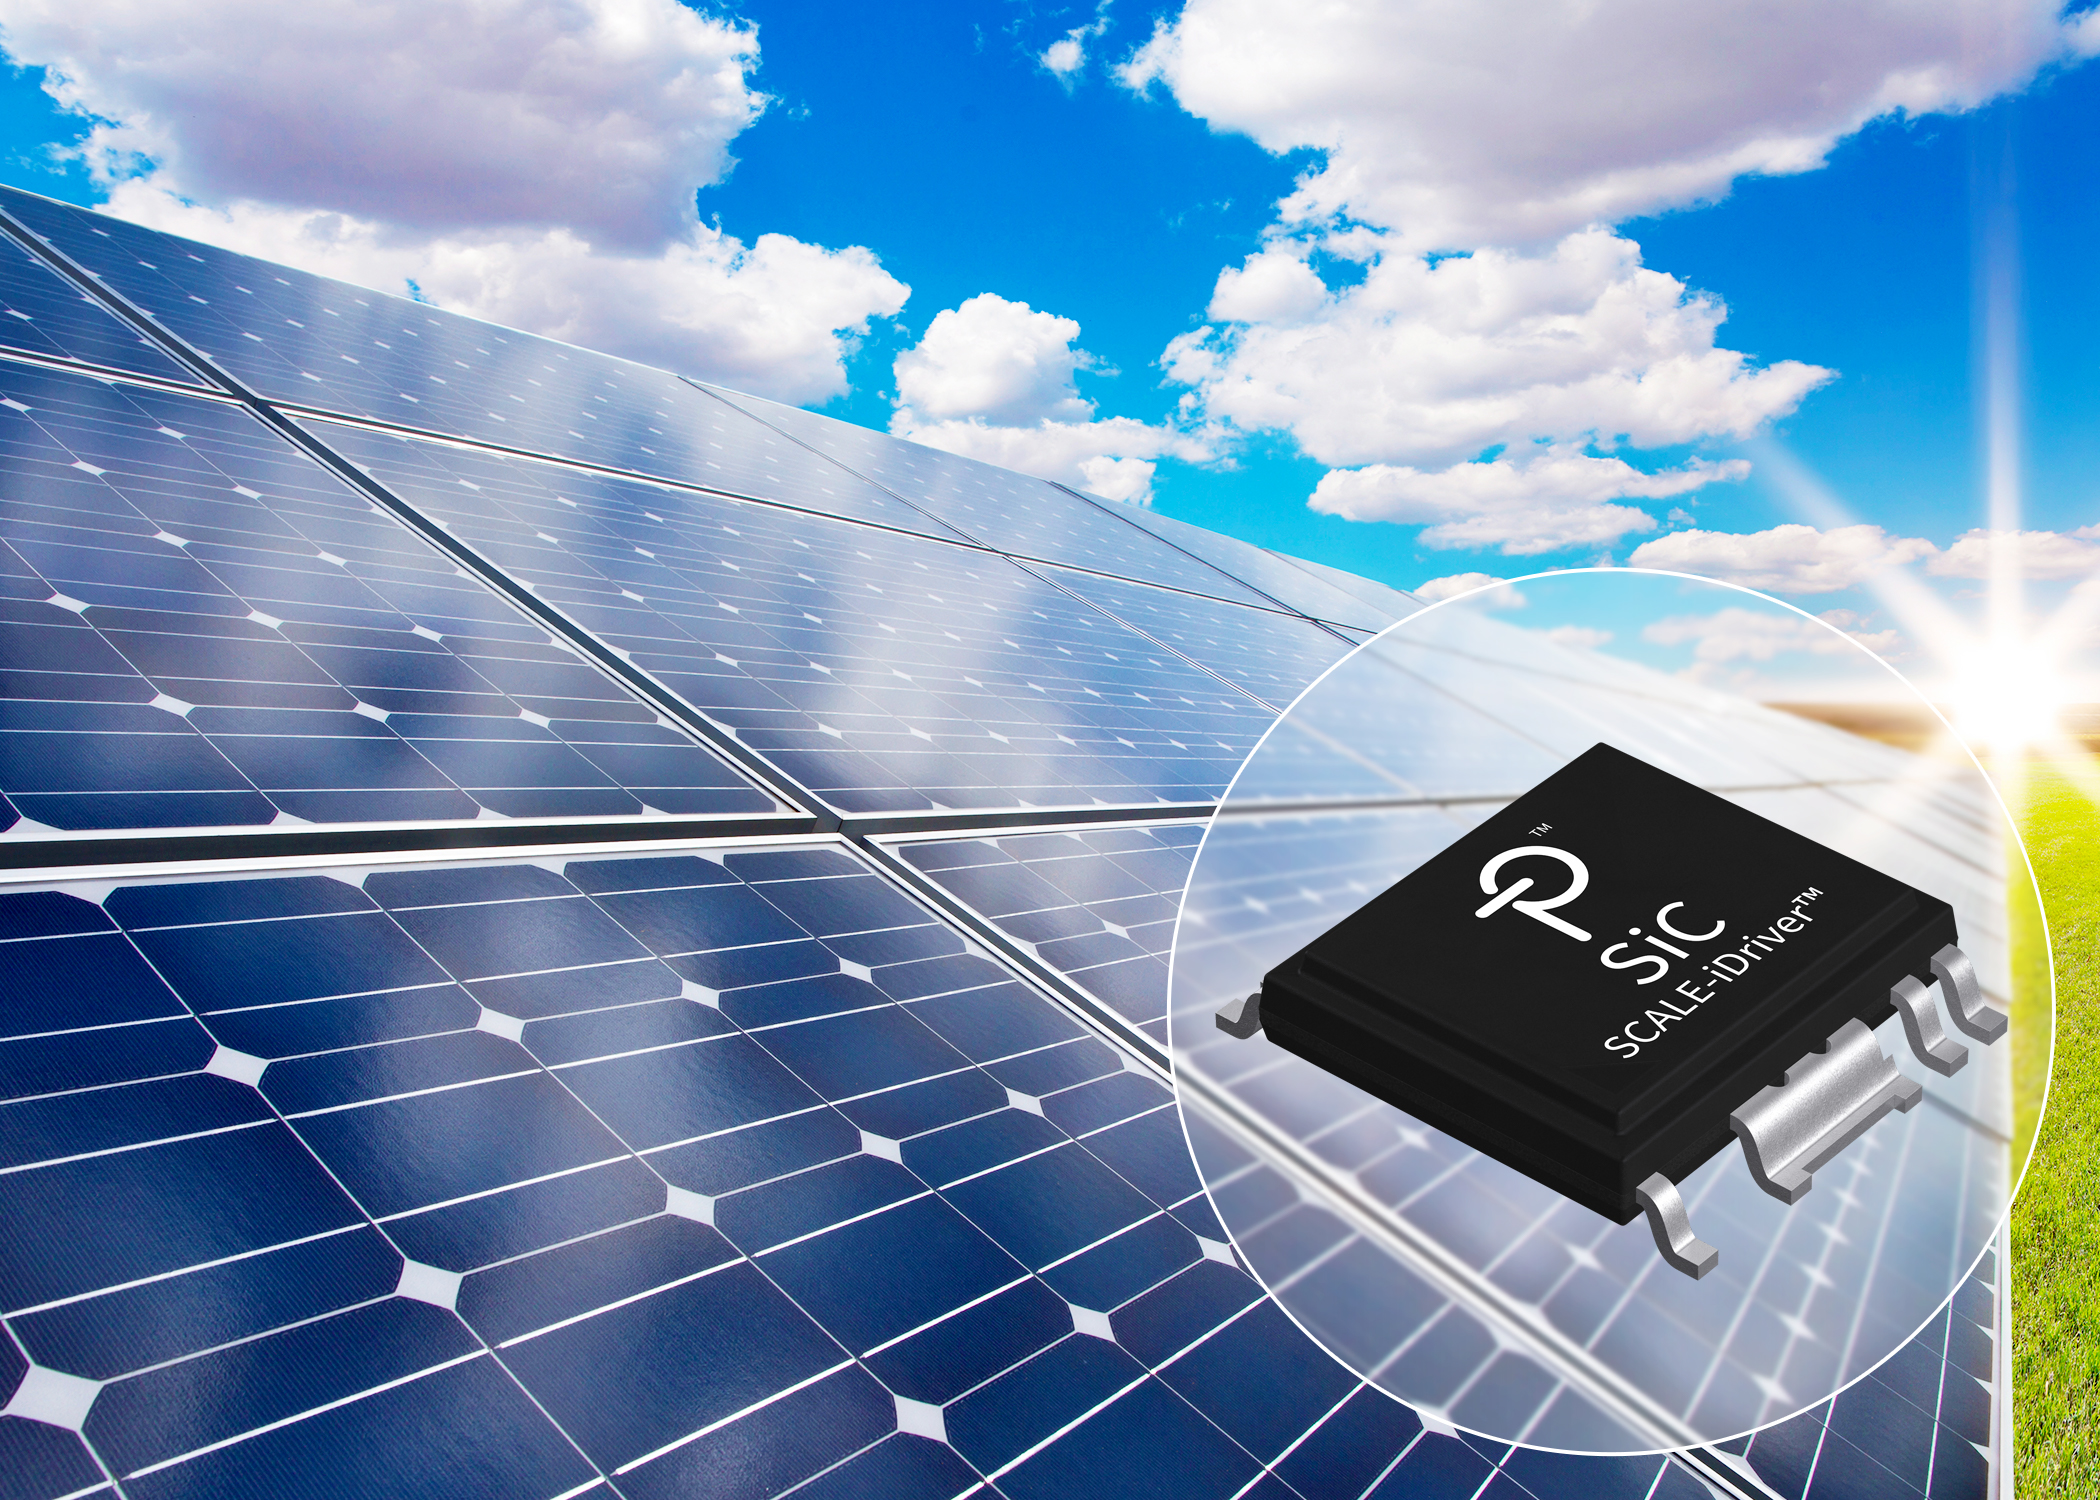 SiC-MOSFET Gate Driver Maximizes Efficiency, Improves Safety